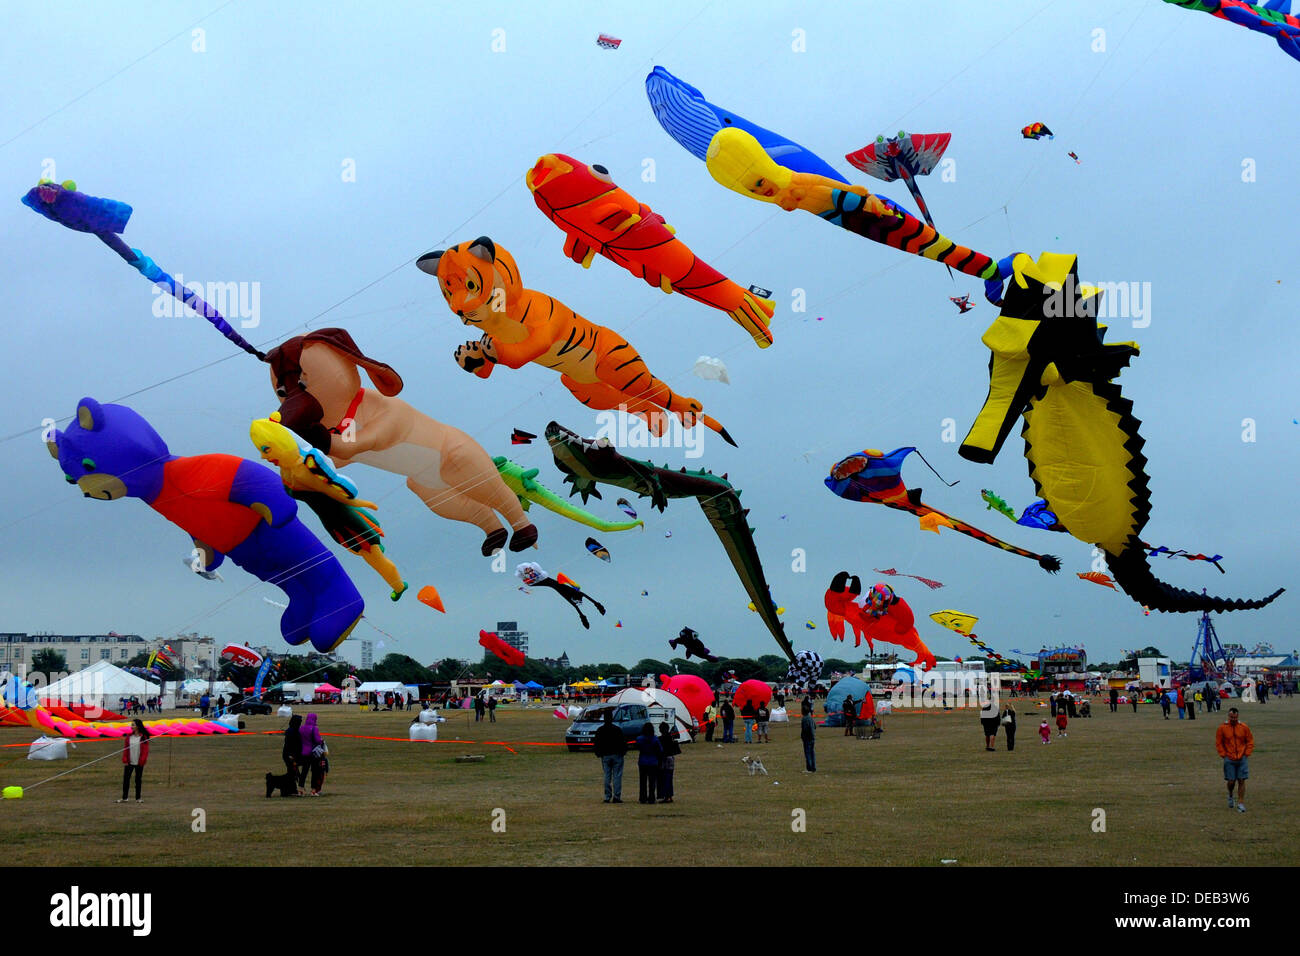 THE ANNUAL KITE FESTIVAL AT SOUTHSEA, HAMPSHIRE AUGUST 2013 Stock Photo